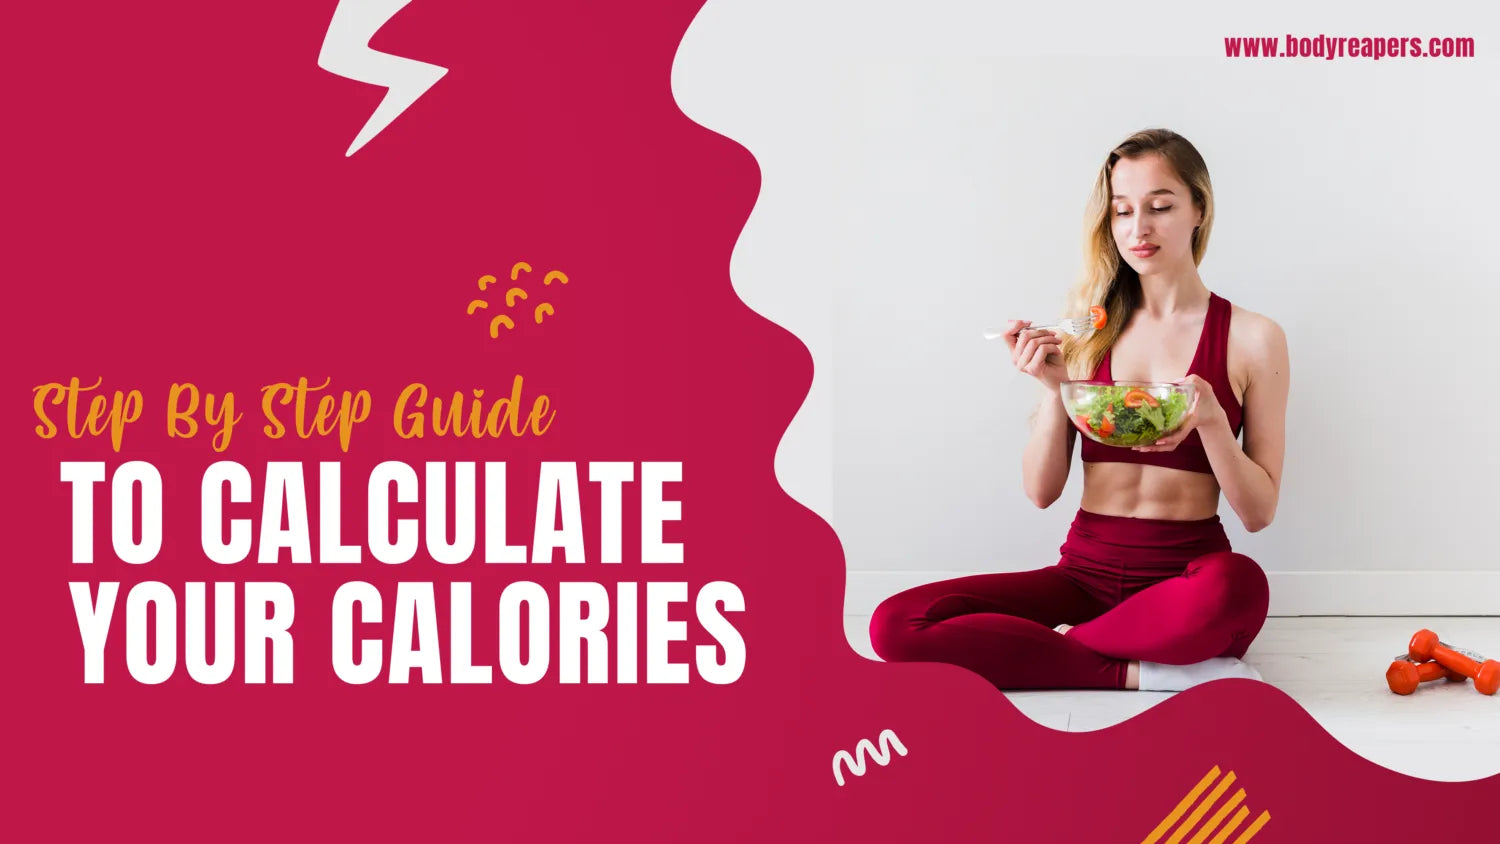 Achieve Your Muscle-Building Goals: The Step-by-Step Guide to Accurately Calculating Your Calories